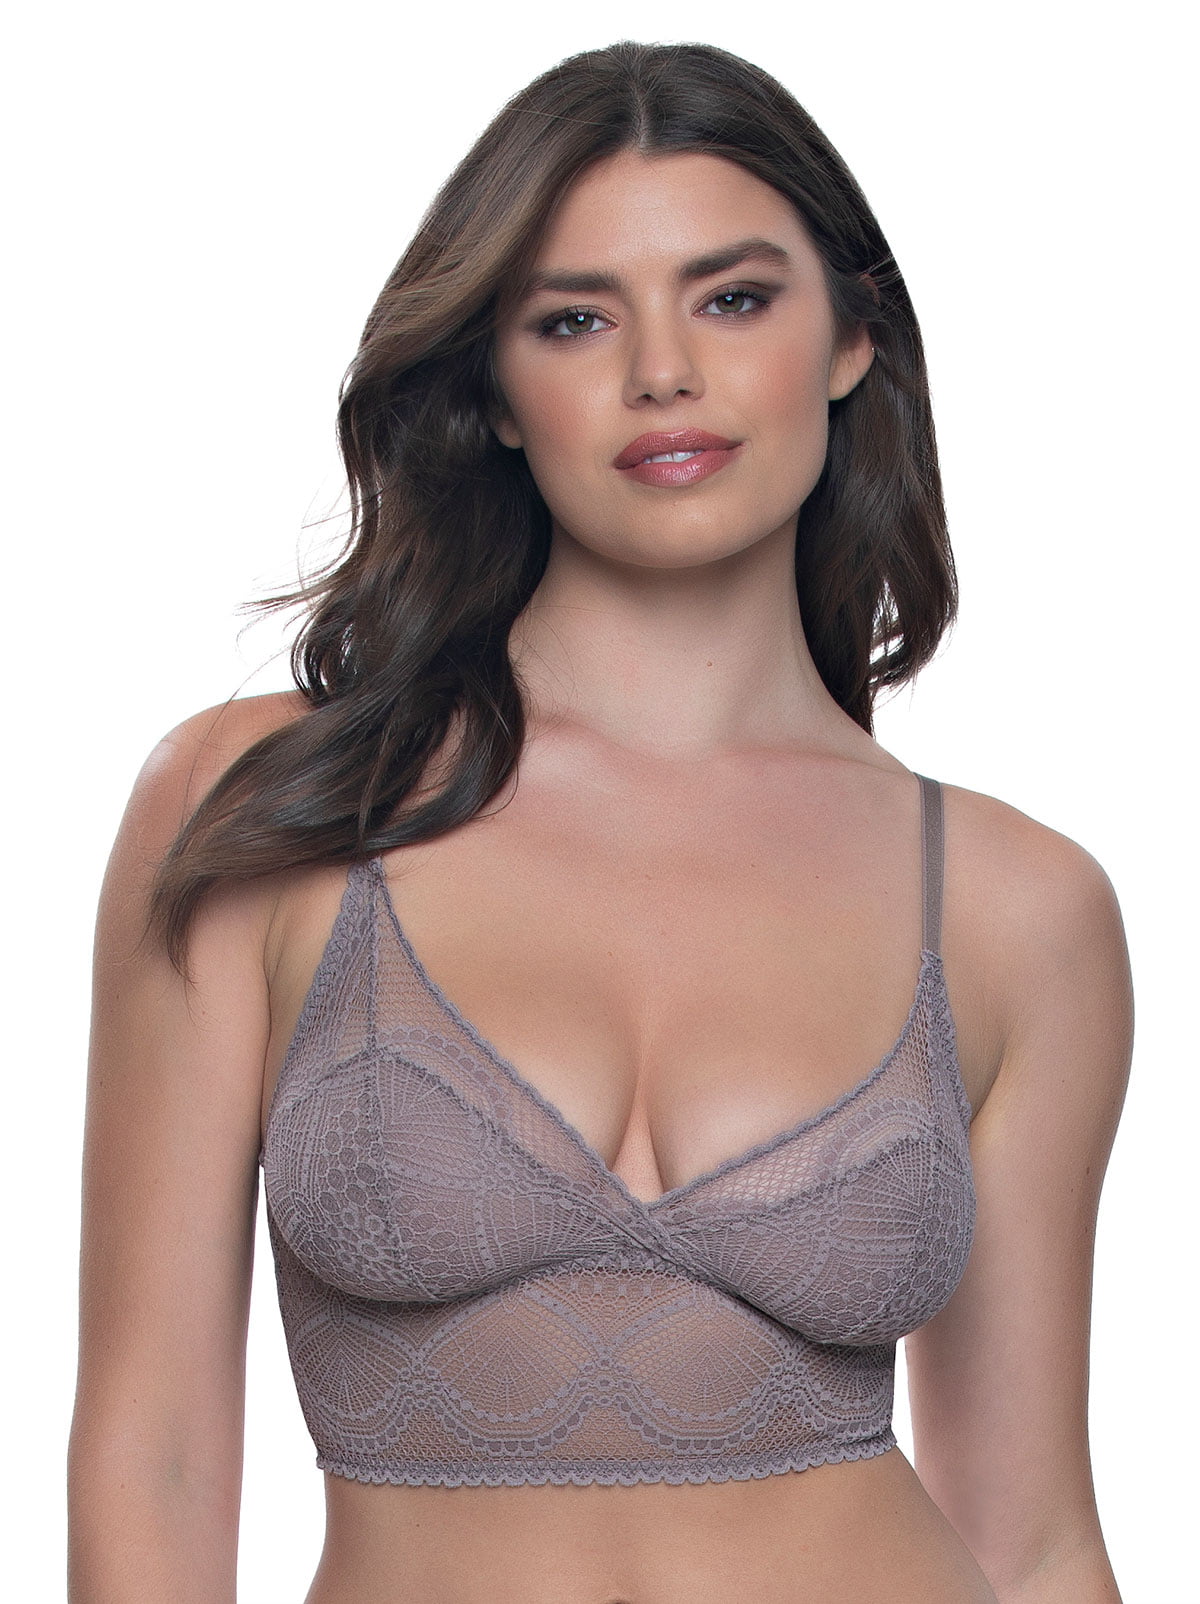 Felina Finesse Cami Bralette - Stretchy Lace Bralettes For Women - Sexy and  Comfortable - Inclusive Sizing, From Small To Plus Size. (Mink, S-M) 